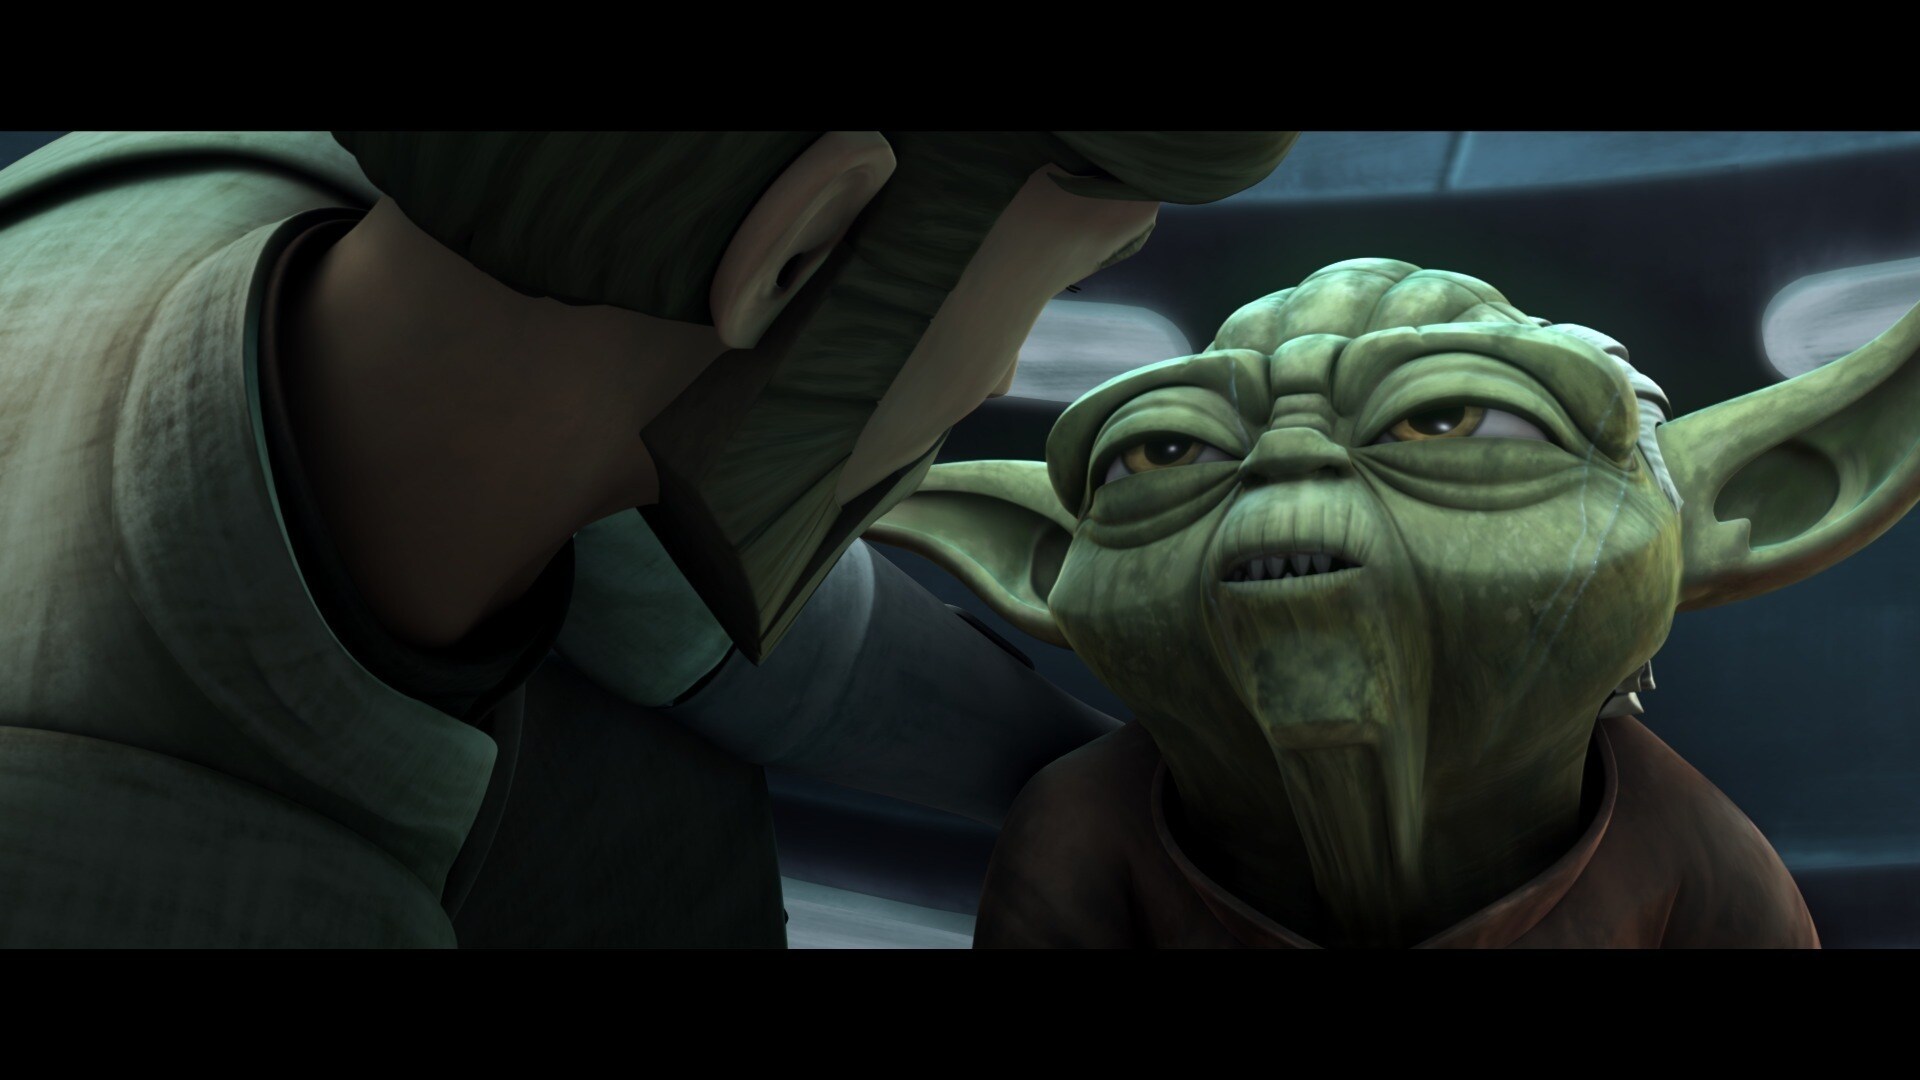 Yoda awakens to find himself pulled from the tank. The dazed Jedi Master was rescued by Obi-Wan a...